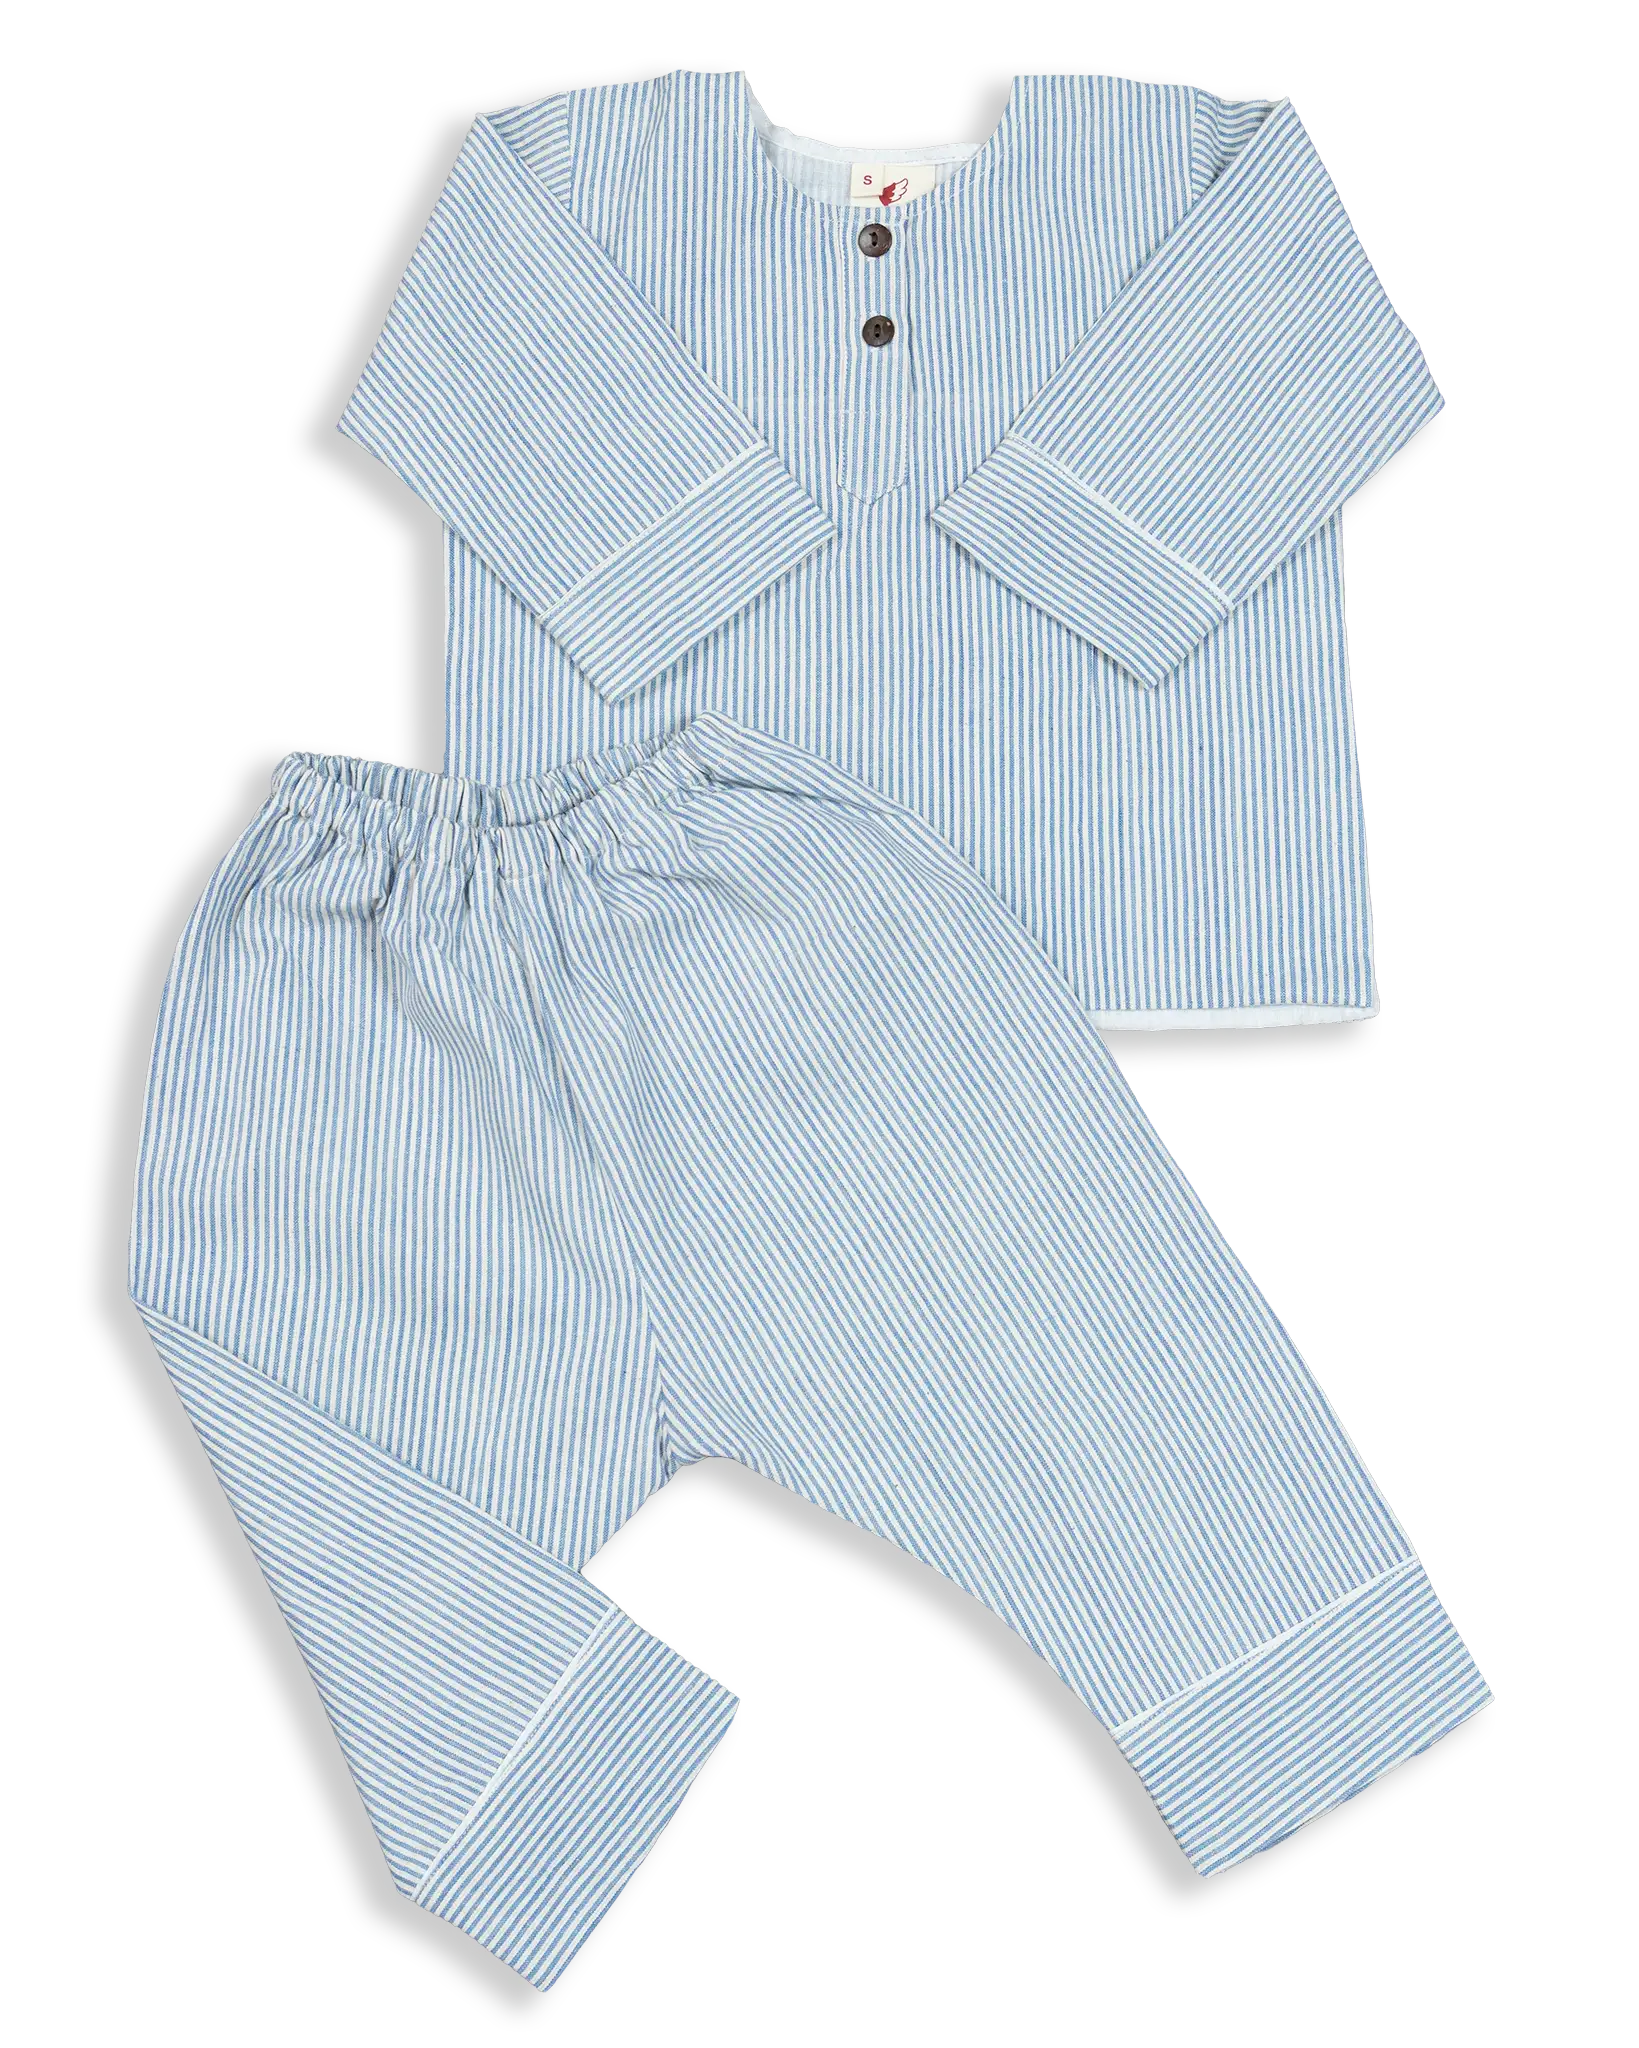 These classic cotton striped Pyjamas are some of our best selling products. Designed and woven here in Nepal they are made with the finest voile lining. It is also known as cotton cashmere, well known and used for kids wear due to the softness and its breathable nature.